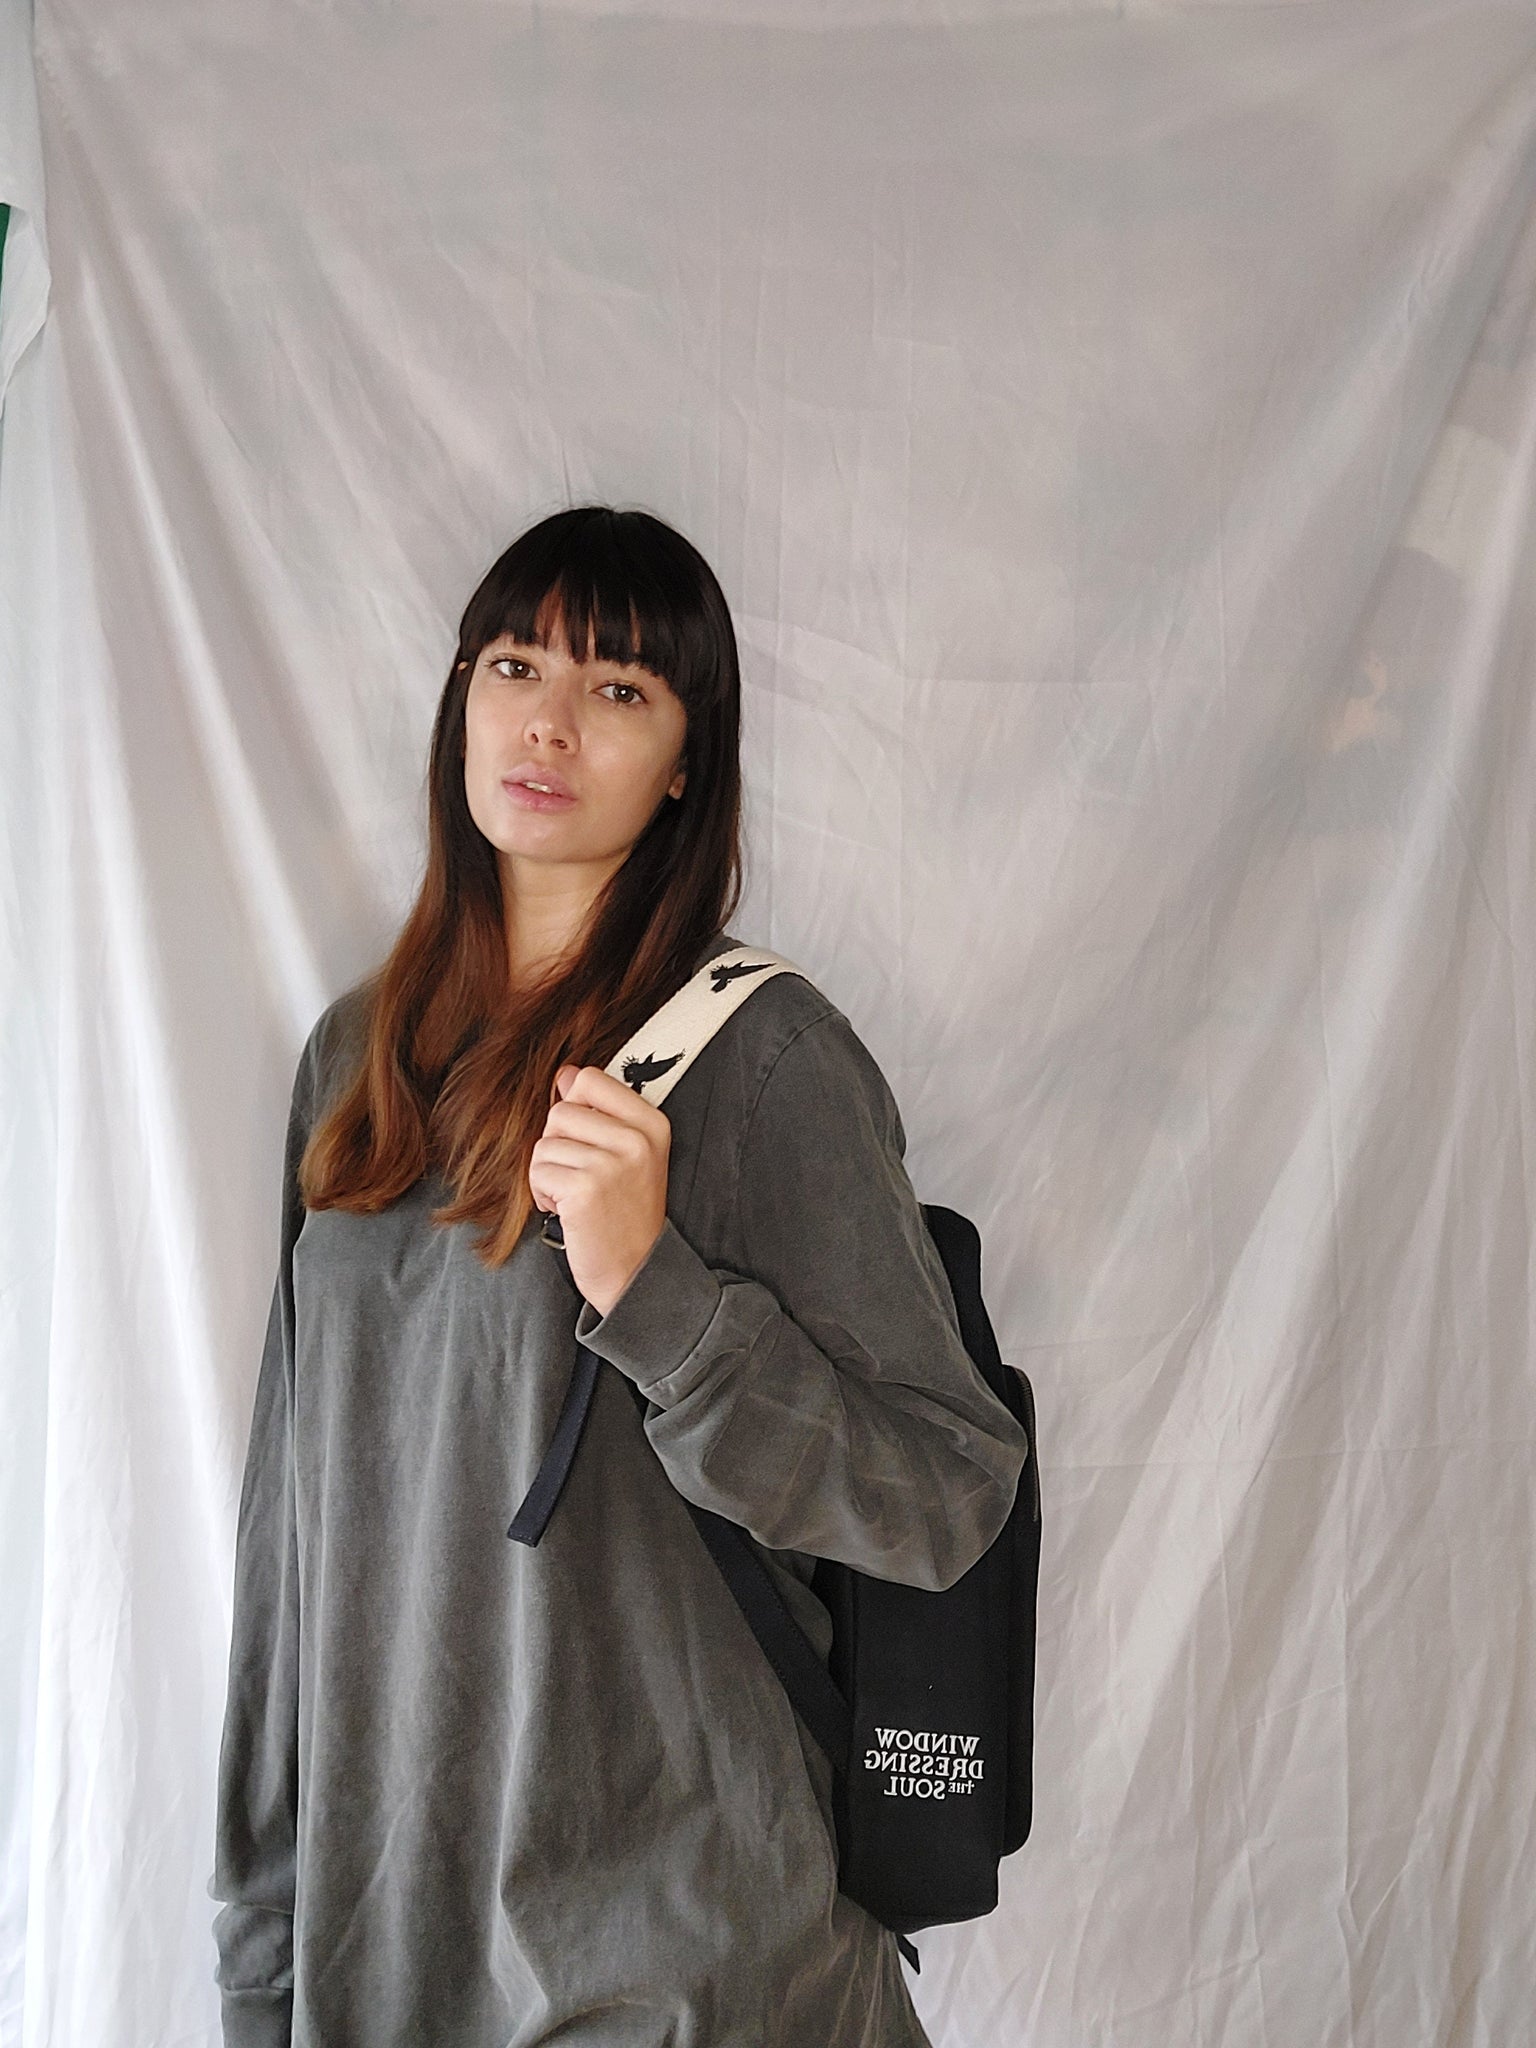 WDTS Backpack- Black Canvas - SD/LG